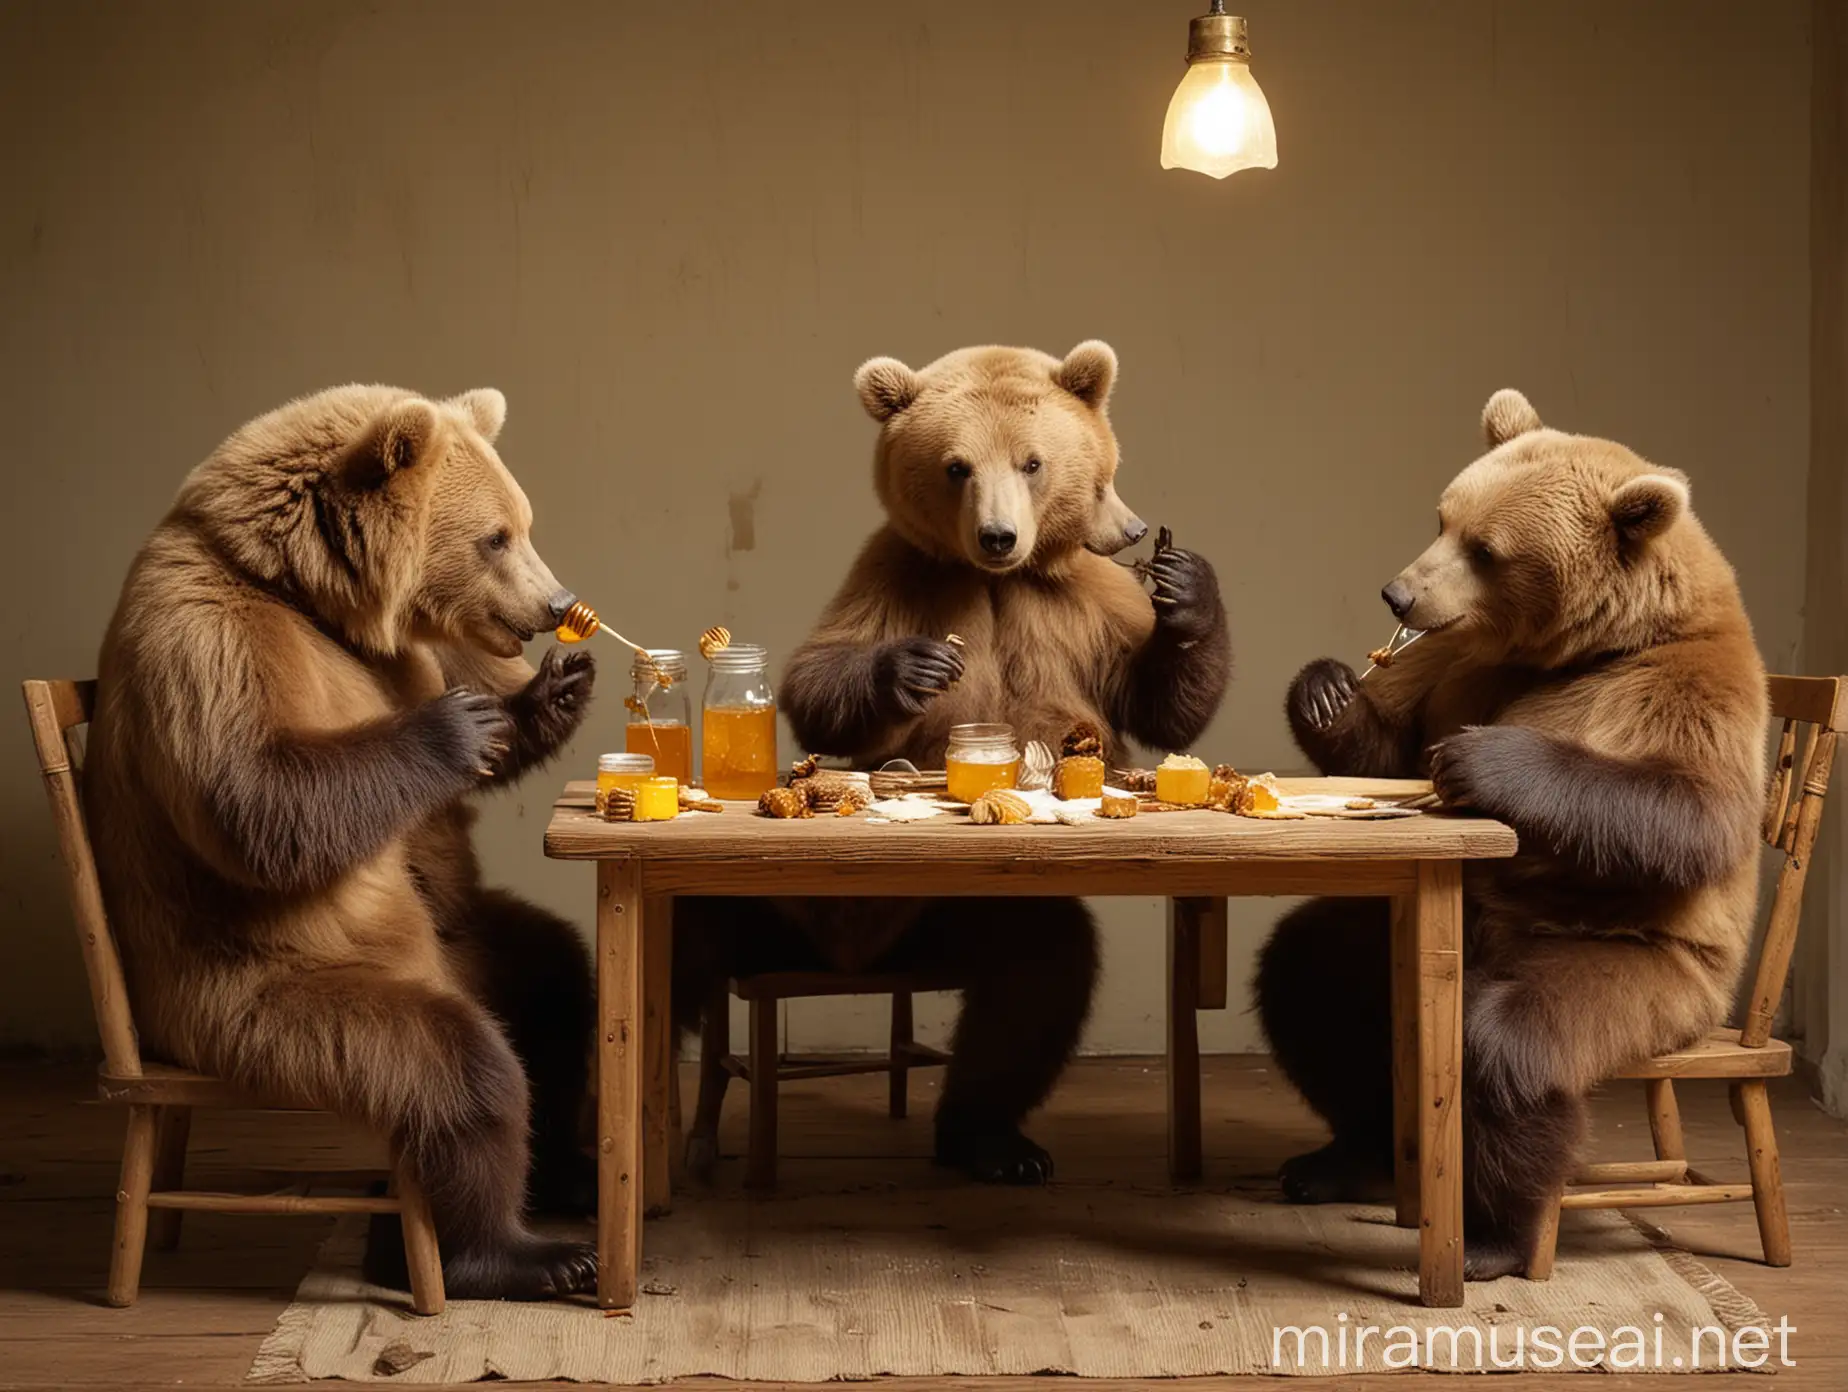 Four bears are sitting at a table , eating honey